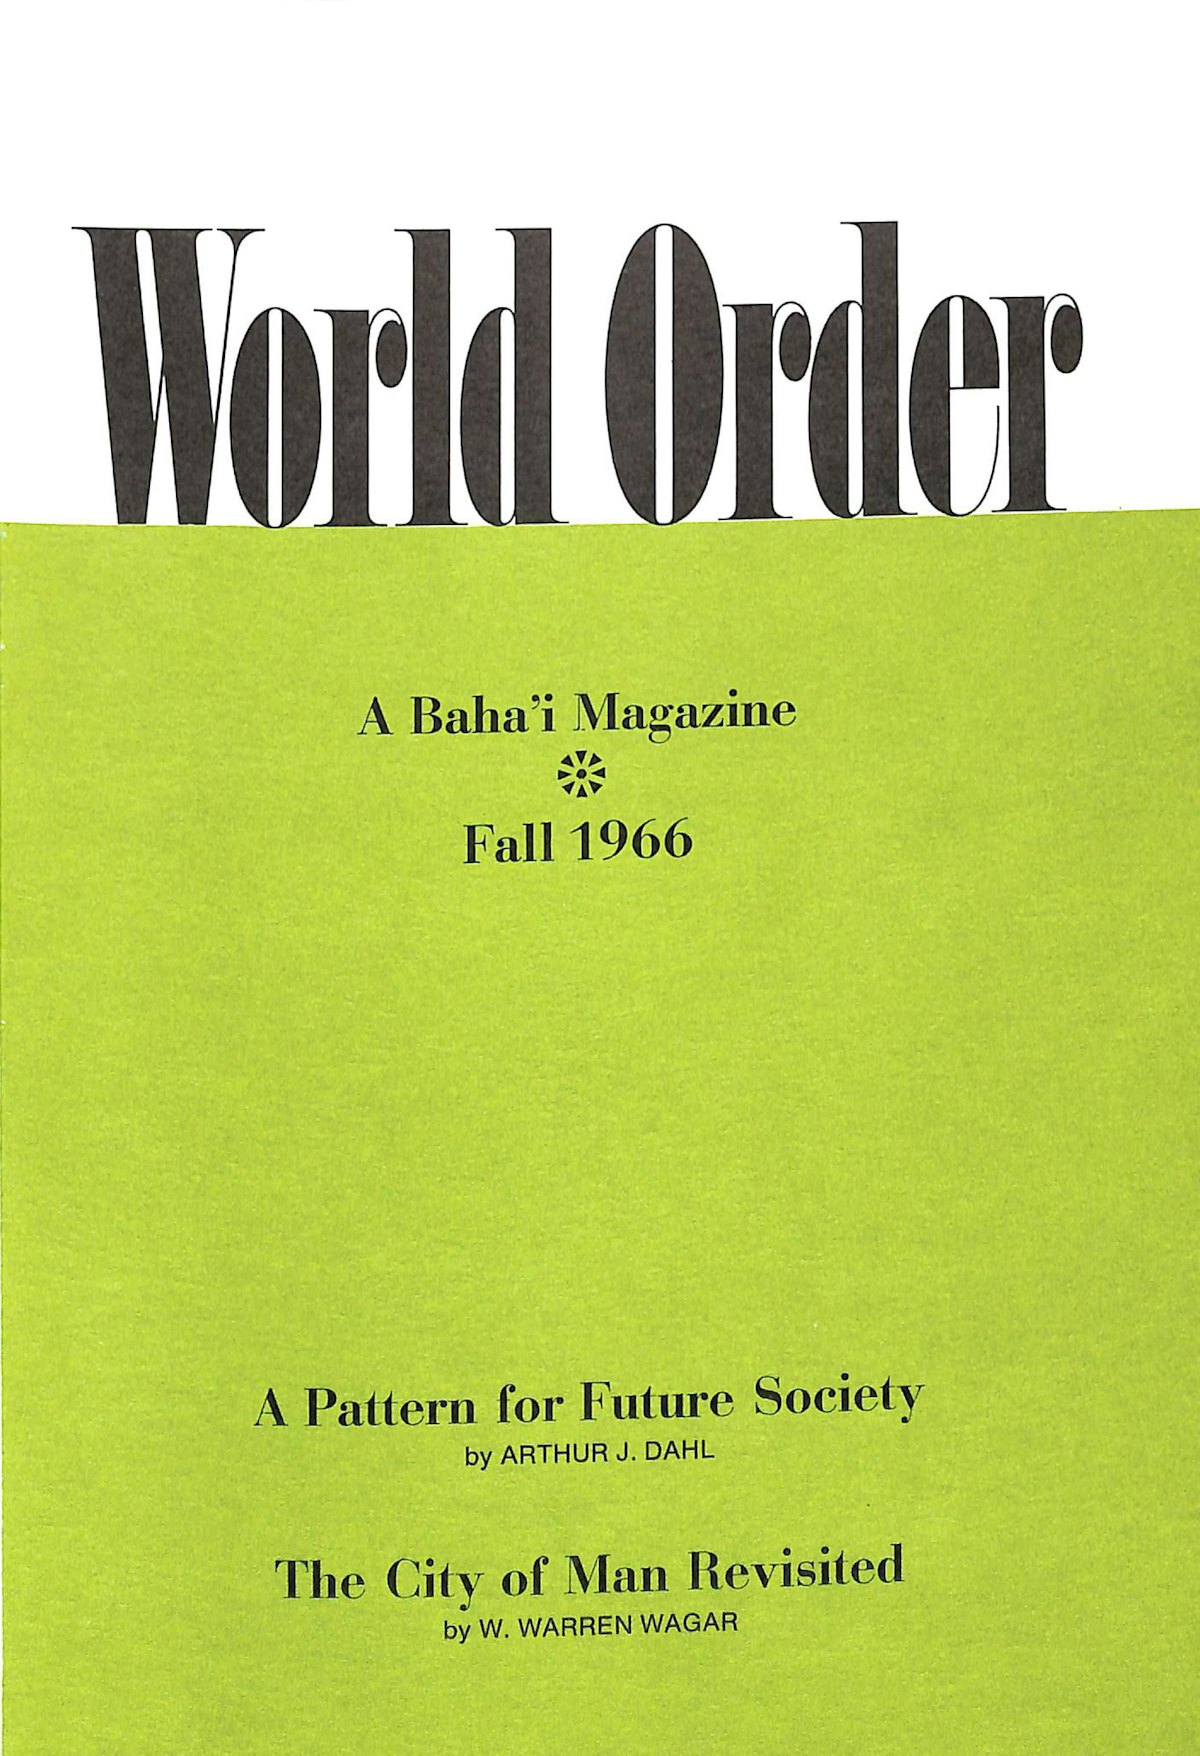 World Order magazine was first published in 1935. It made available essays, poems, personal recollections, and historical pieces. The periodical brought together into one volume works by scholars, poets, artists, and practitioners from various fields of endeavor. The first volume also included excerpts from a letter by Shoghi Effendi titled “The Goal of a New World Order.”